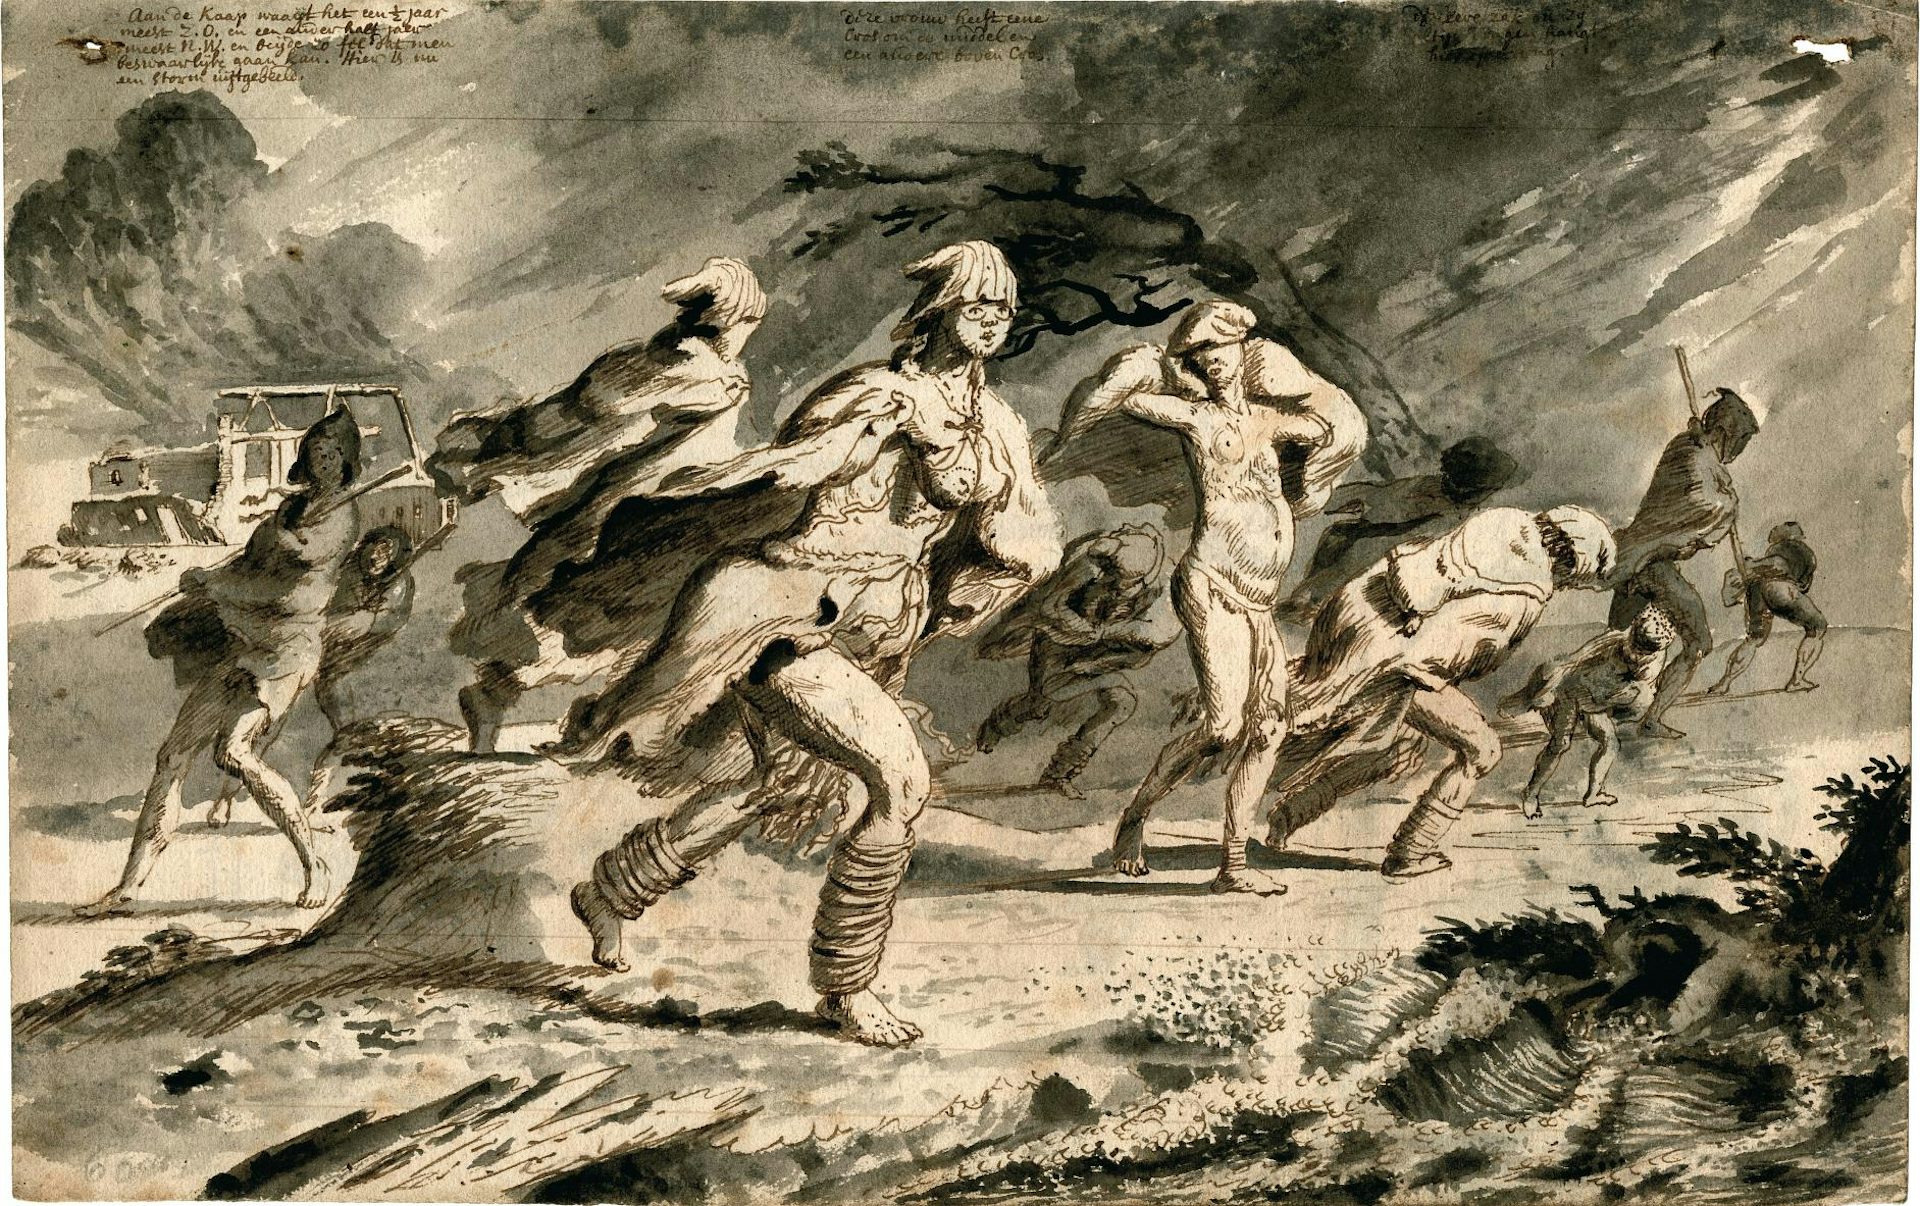 Khoikhoi in a Storm by unknown artist, (1700 - 1730)